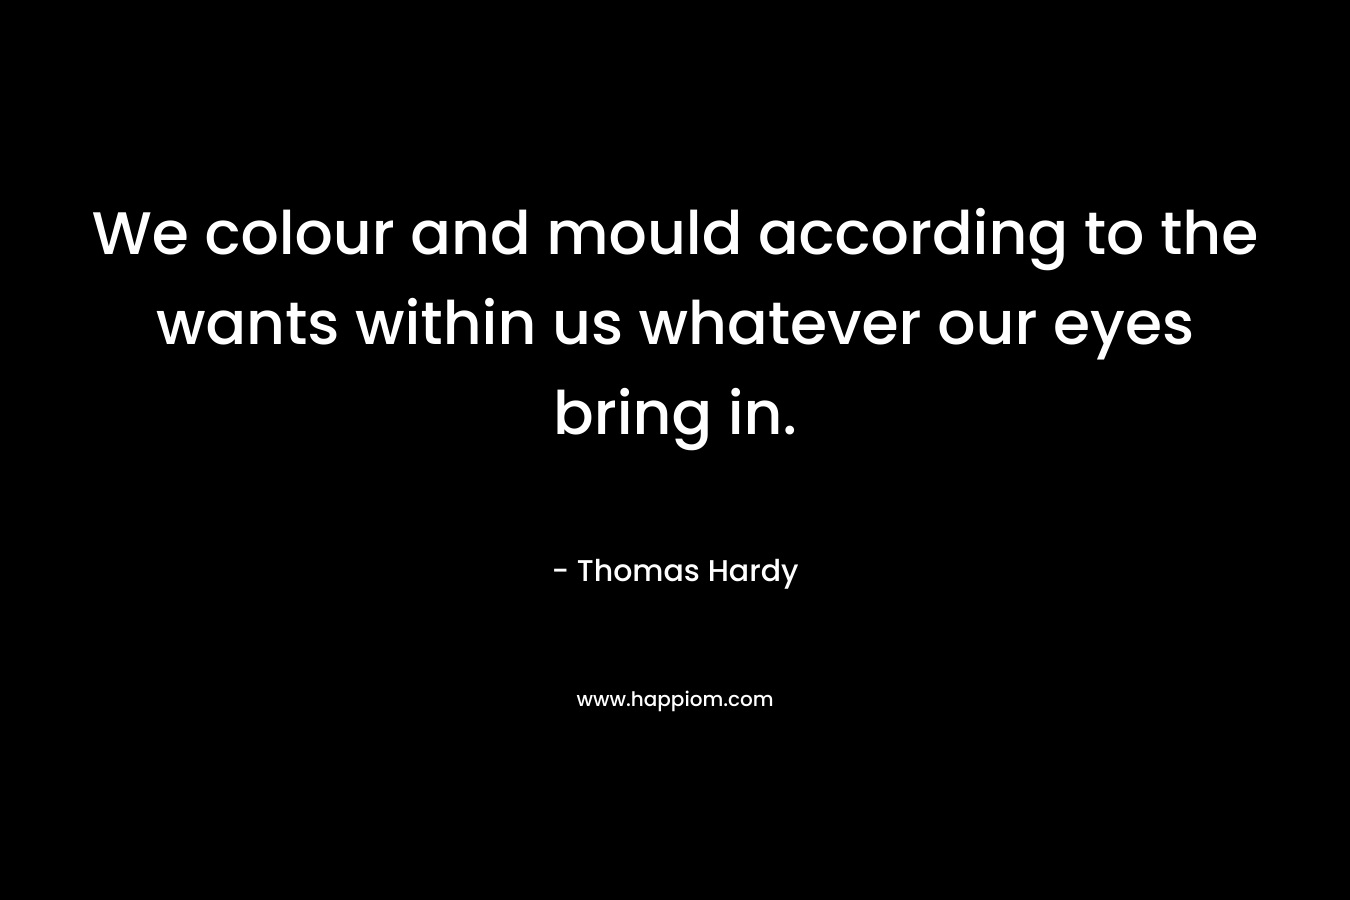 We colour and mould according to the wants within us whatever our eyes bring in. – Thomas Hardy